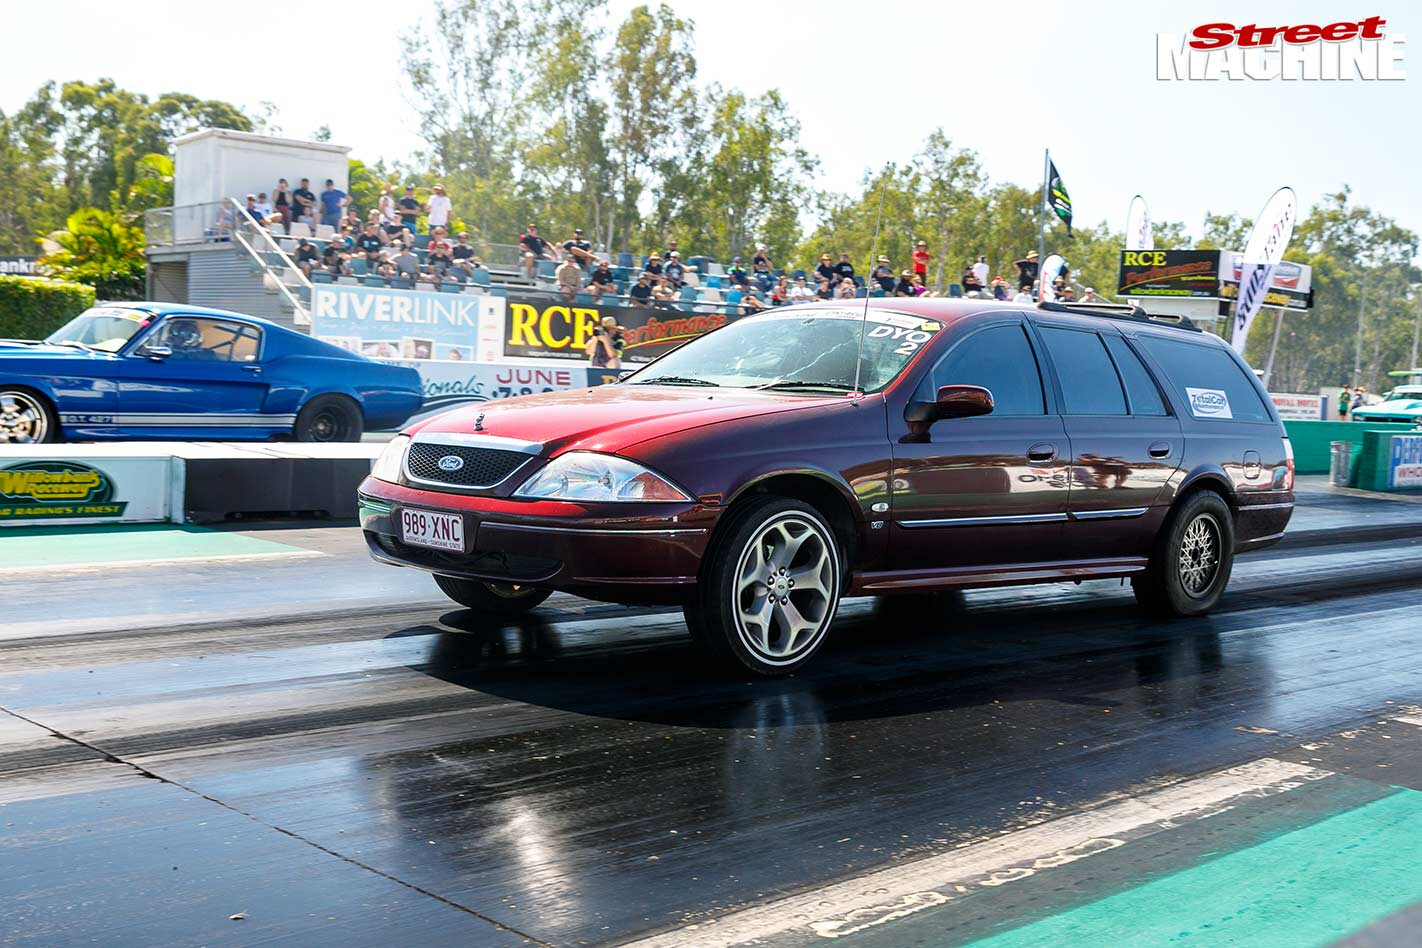 Ford Falcon AU wagon at drag challenge weekend